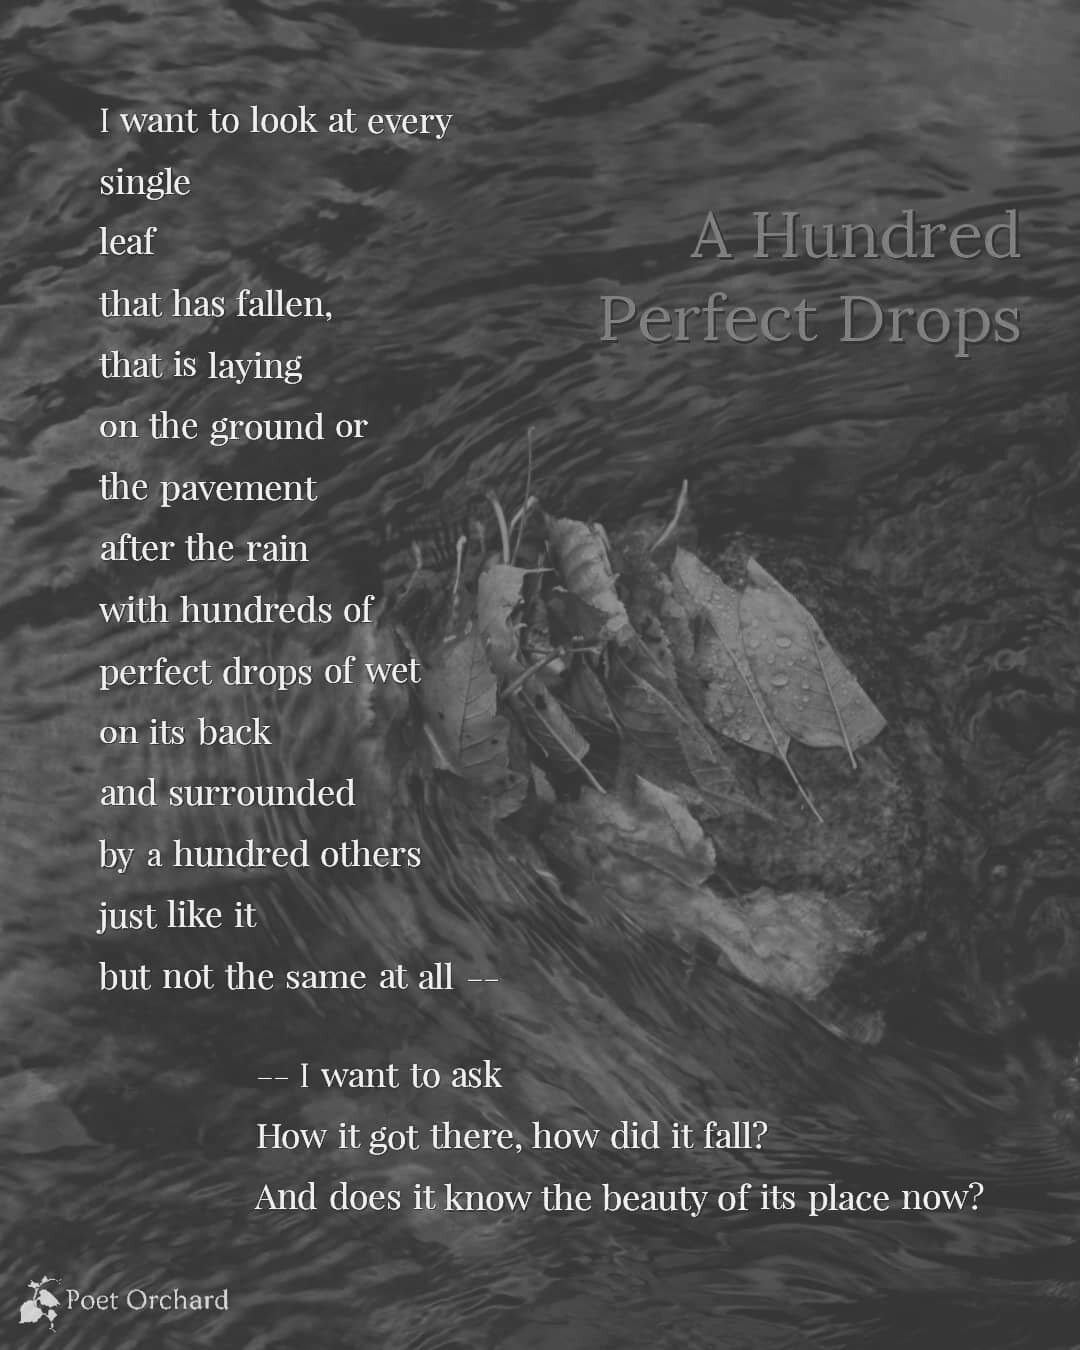 A Hundred Perfect Drops &bull; Christie Flemming &bull; 2020 
.
.
Closing out our month of Salvation in the Simple, a poem from Christie Flemming to usher us into fall and ease the landing. Let us know what simple things you've been noticing. 
🍁
Kee